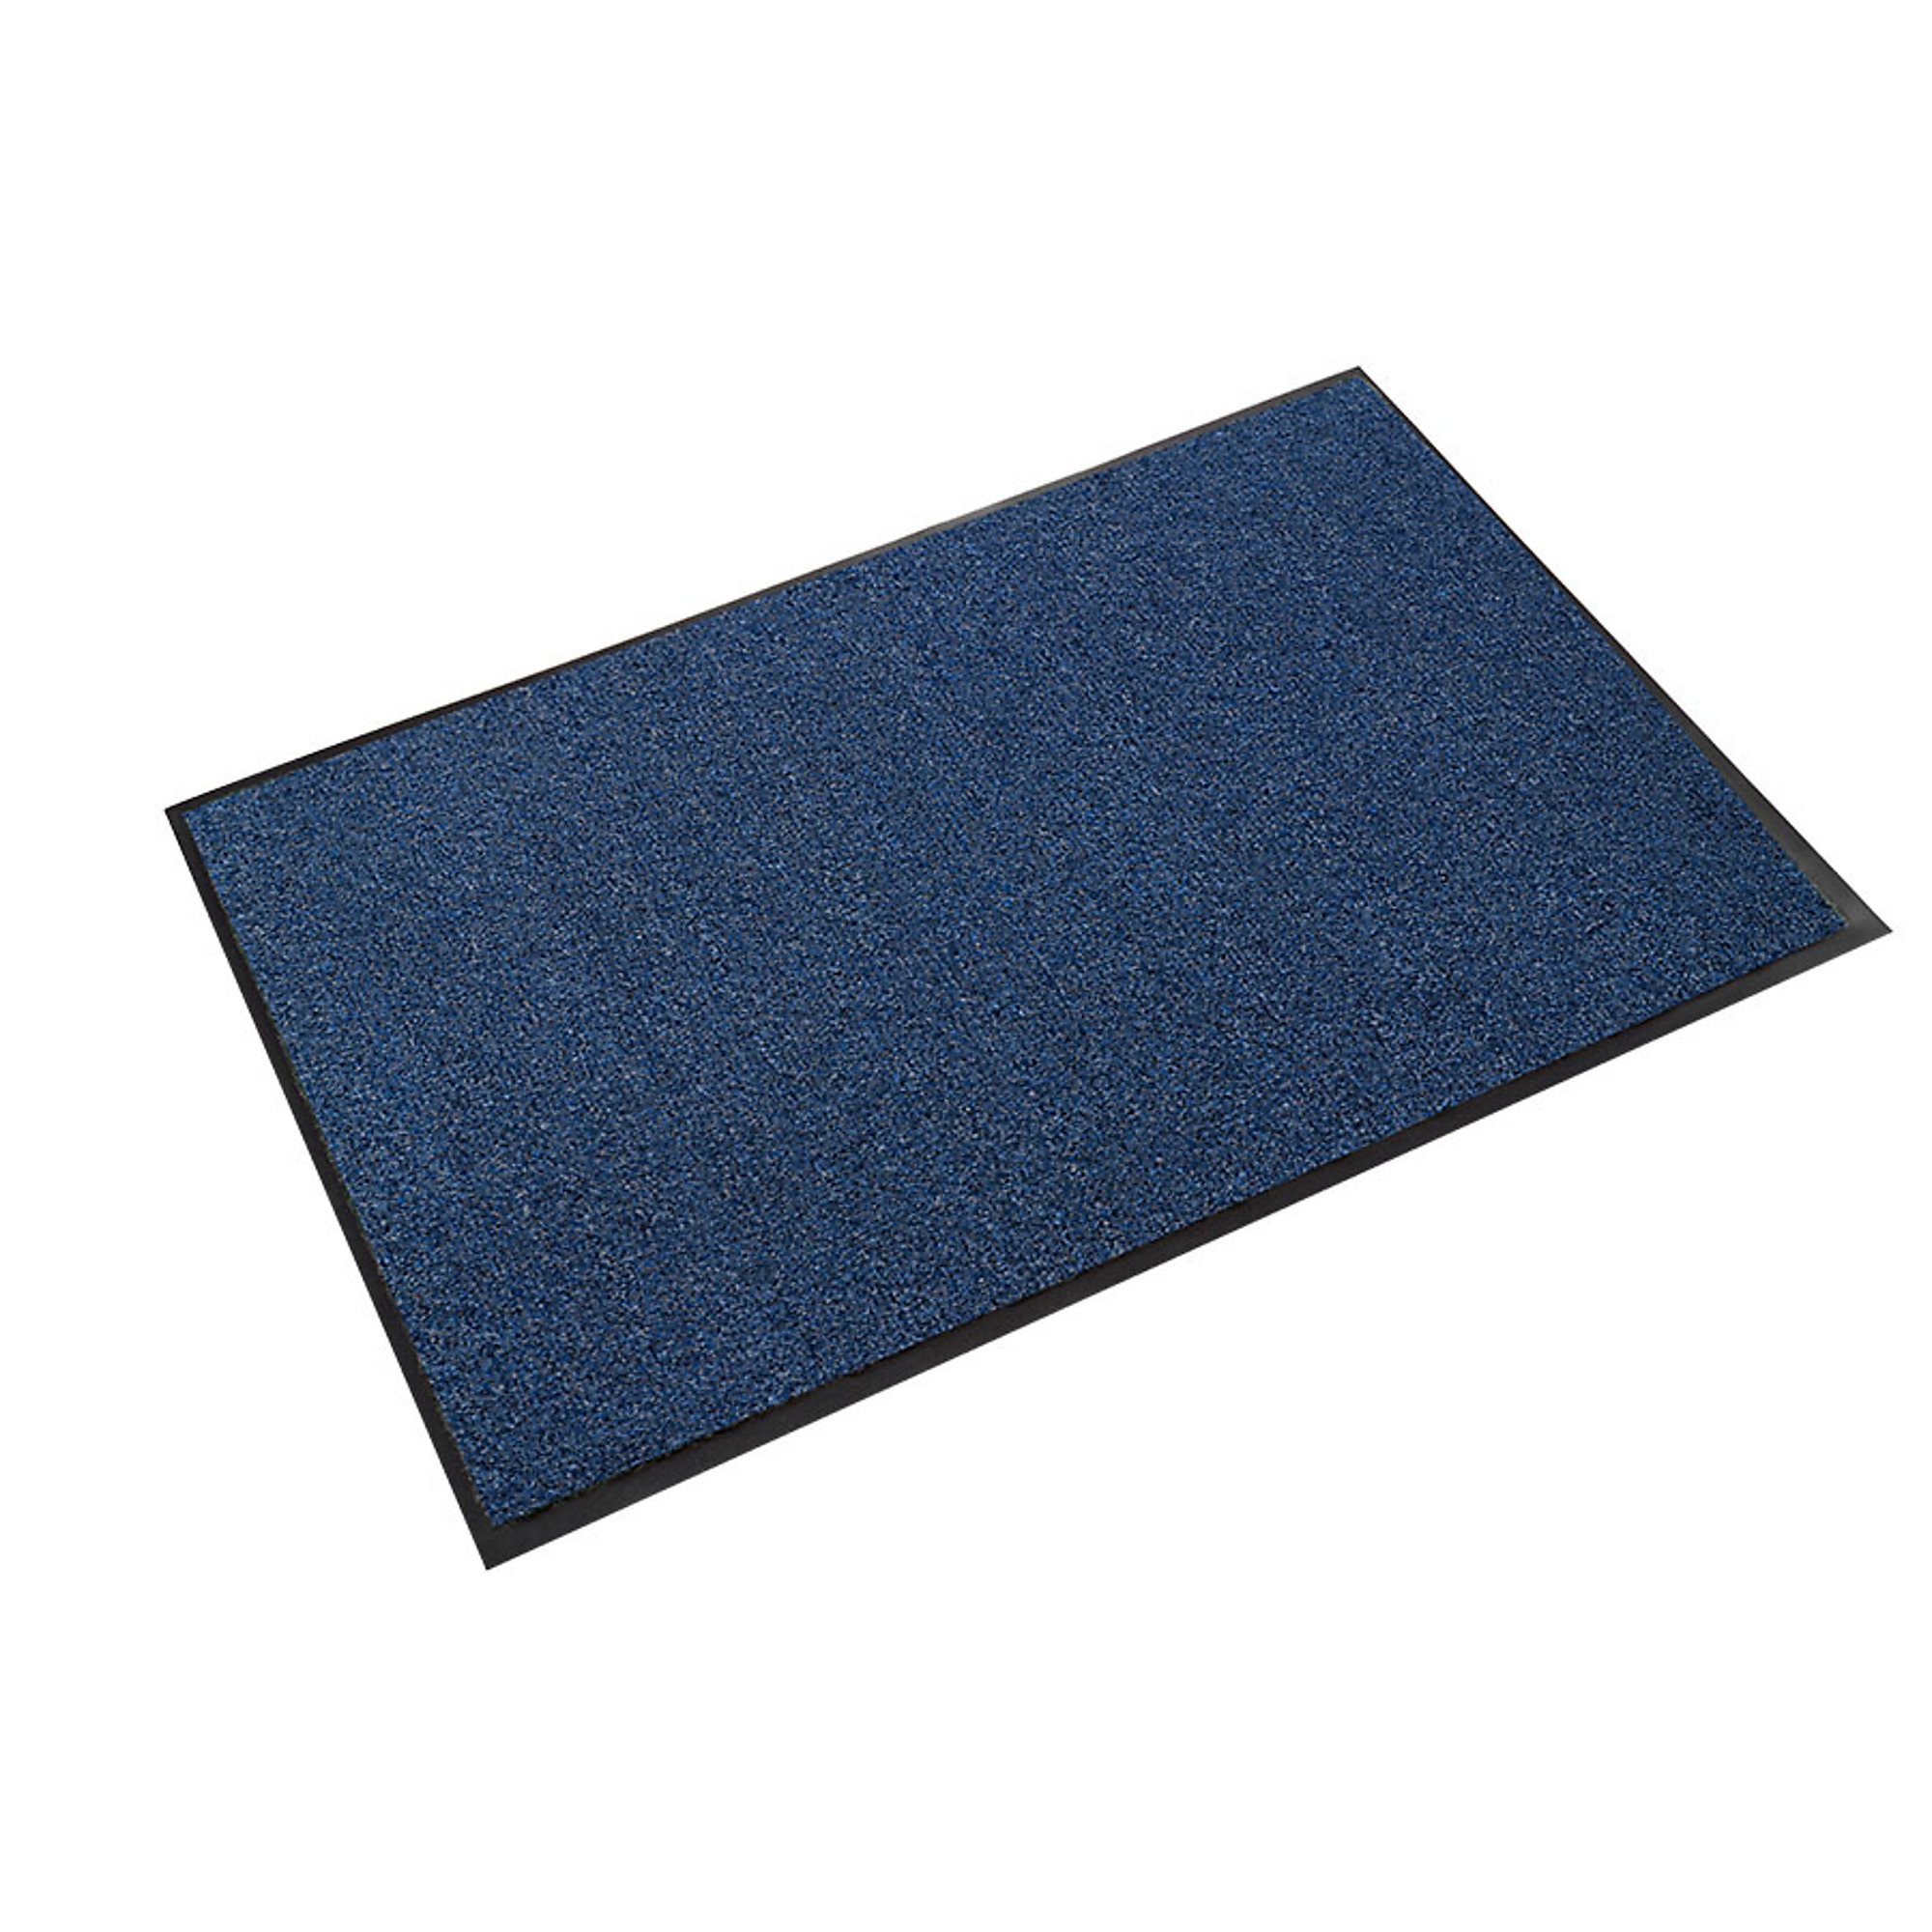 Crown Matting Technologies, Wonder-Pro 4ft.x10ft. Marlin Blue, Width 48 in, Length 120 in, Thickness 7/16 in, Model WP 0410MB